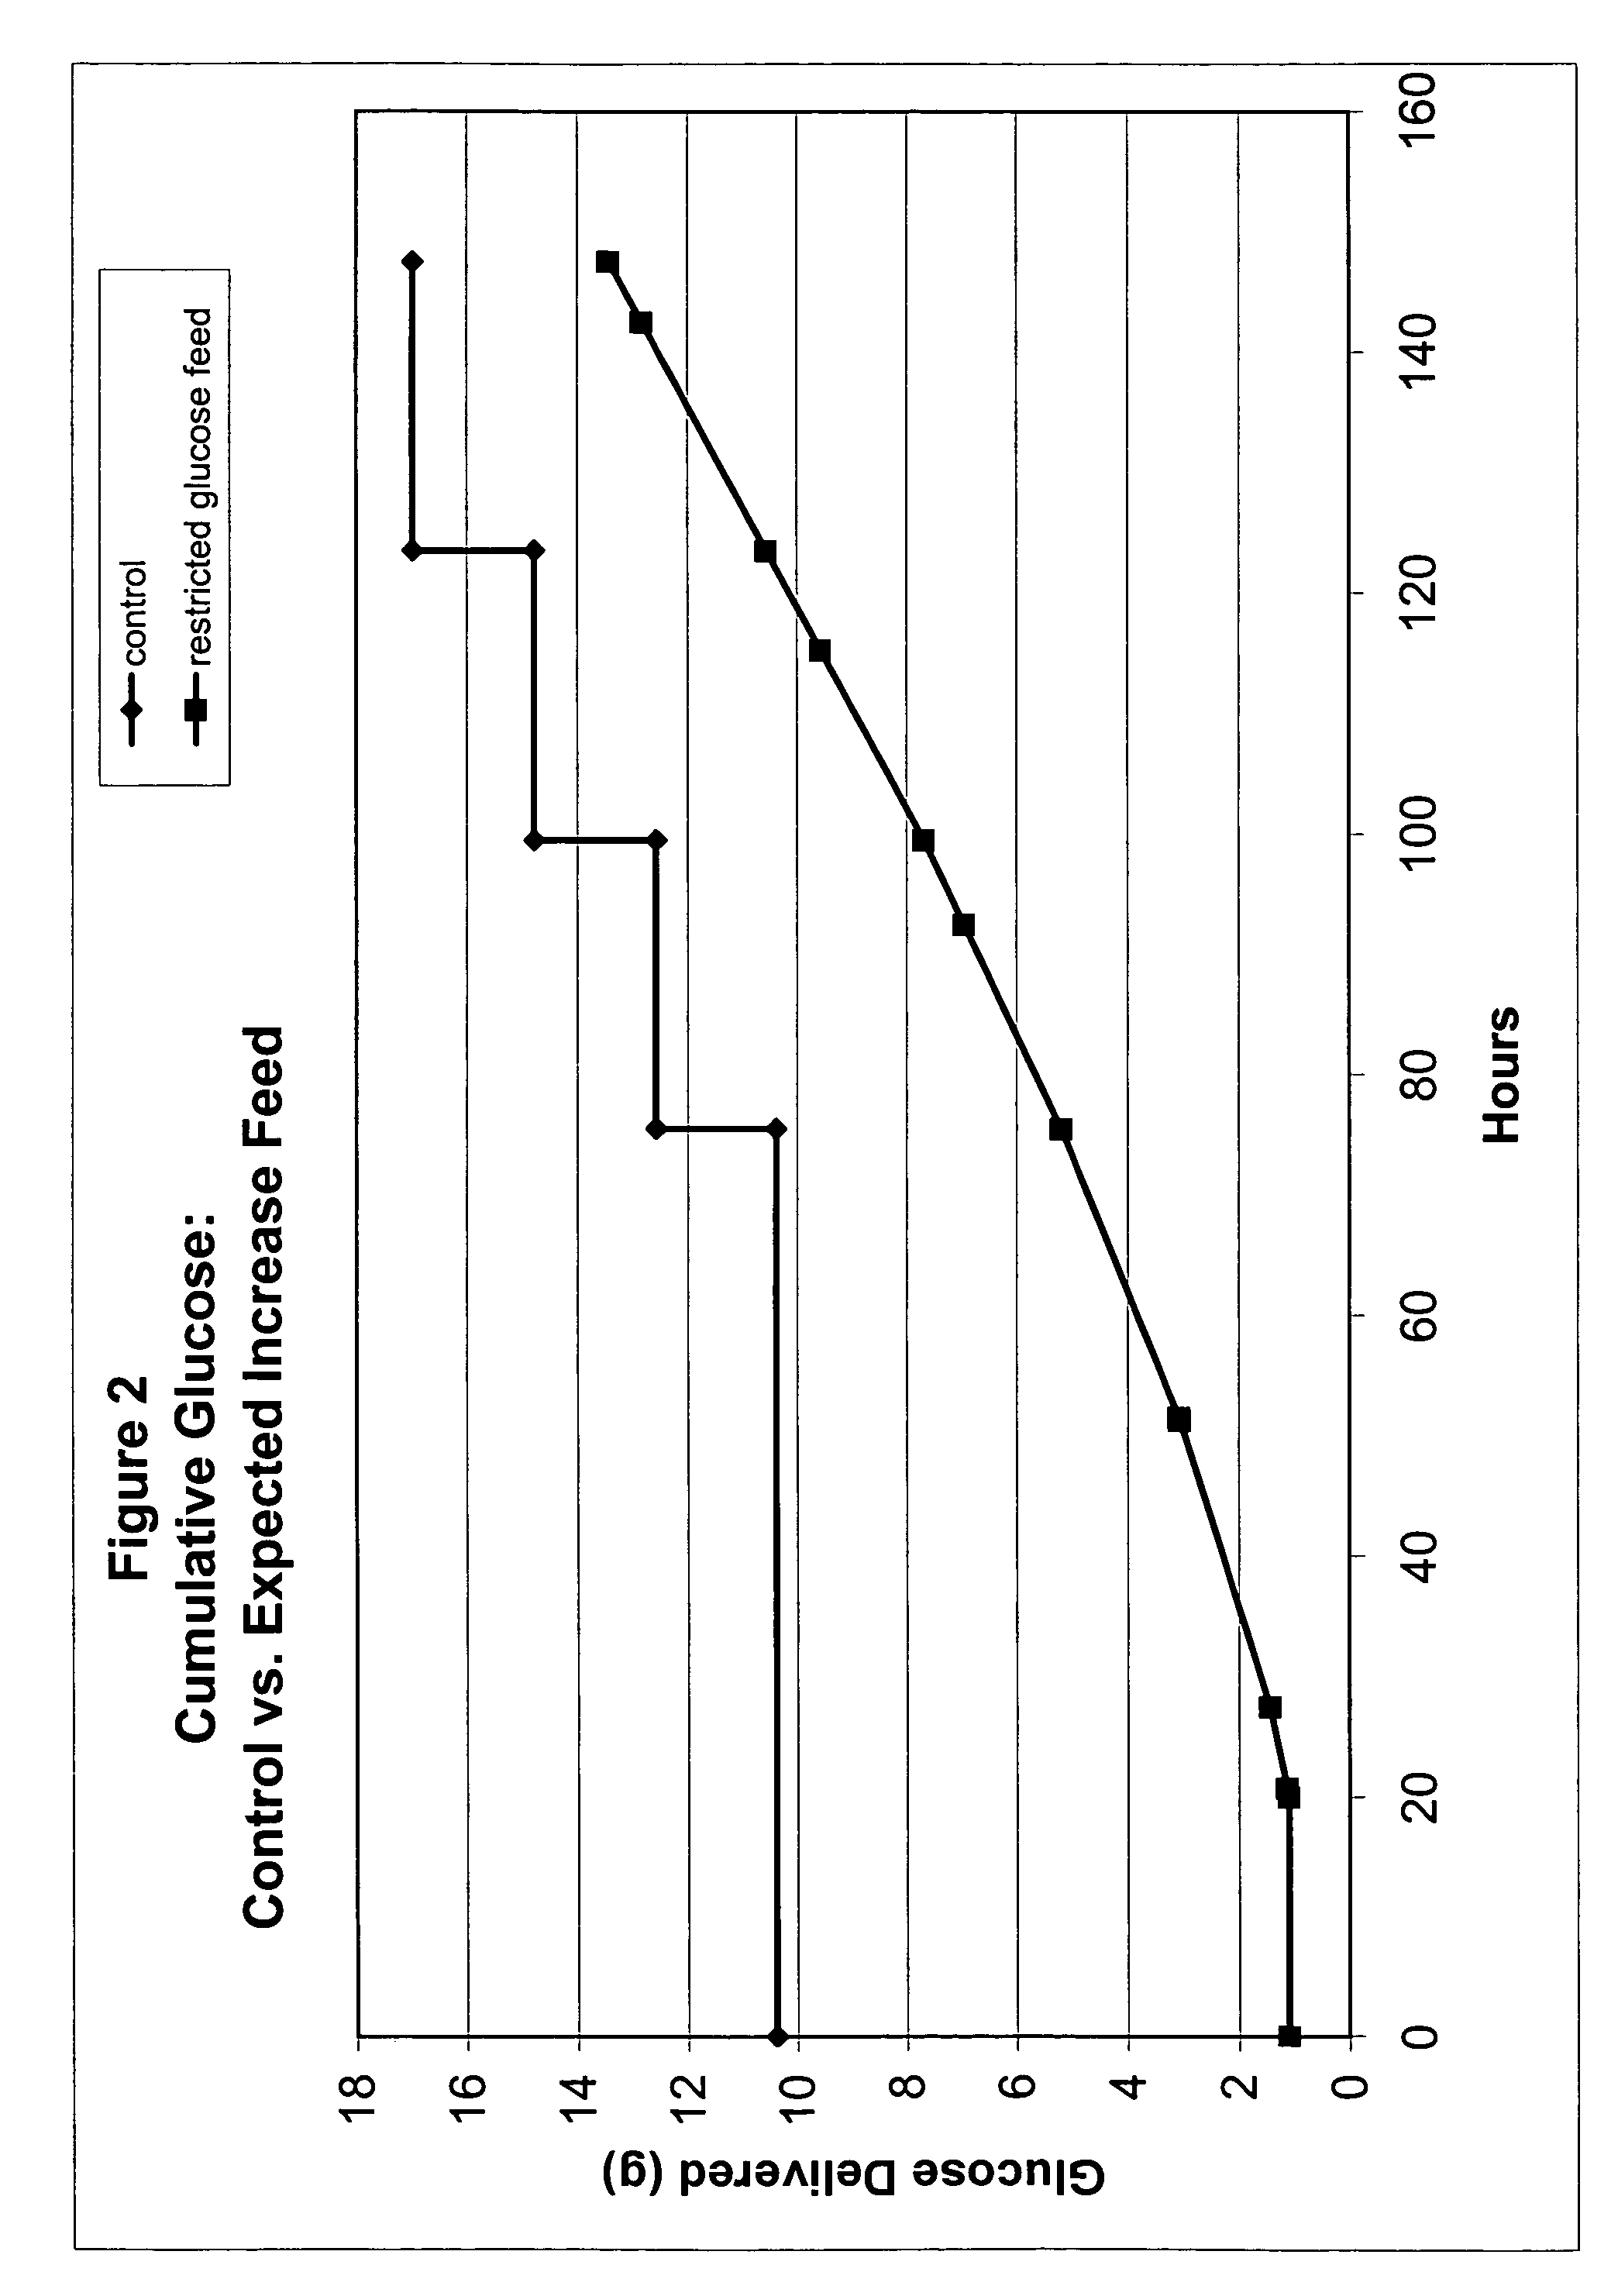 Restricted glucose feed for animal cell culture